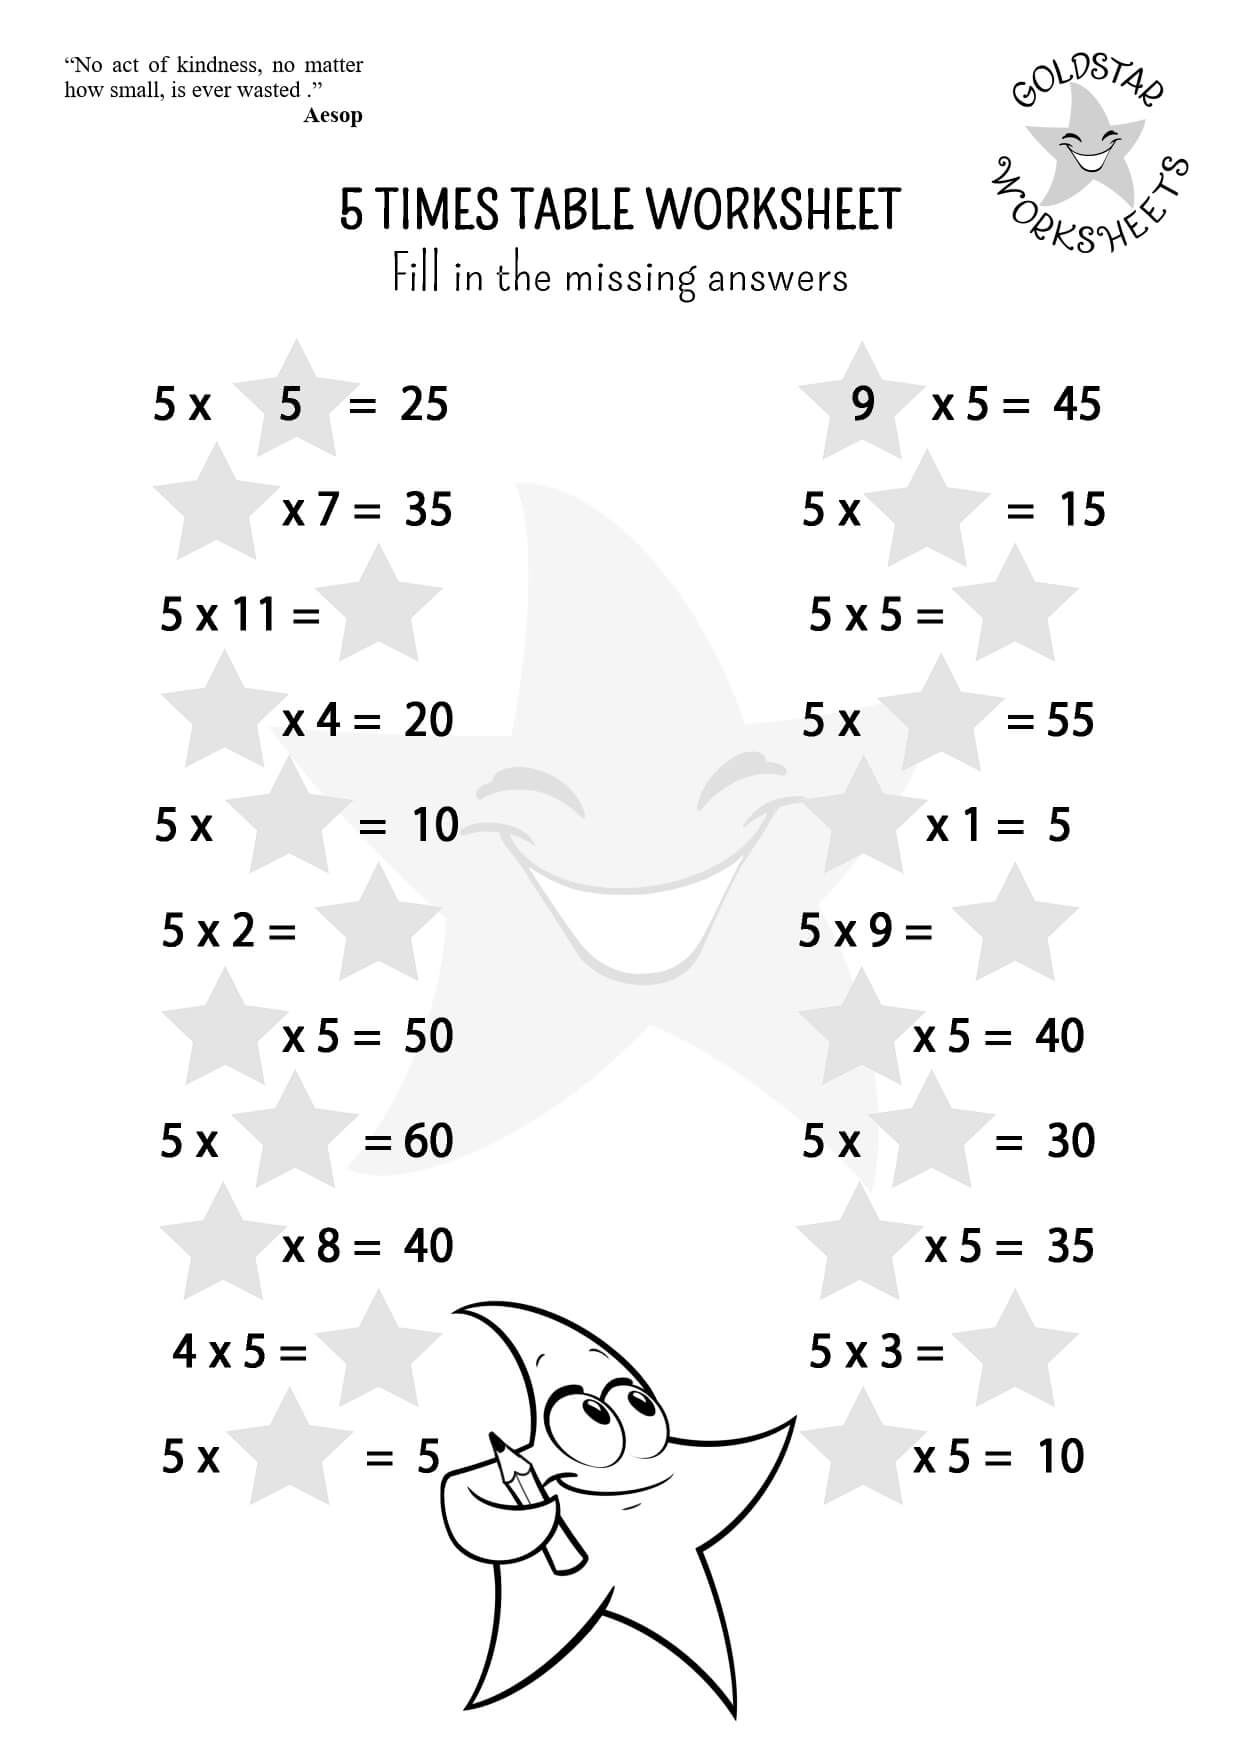 5-times-table-worksheets-multiplication-facts-practice-free-pdf